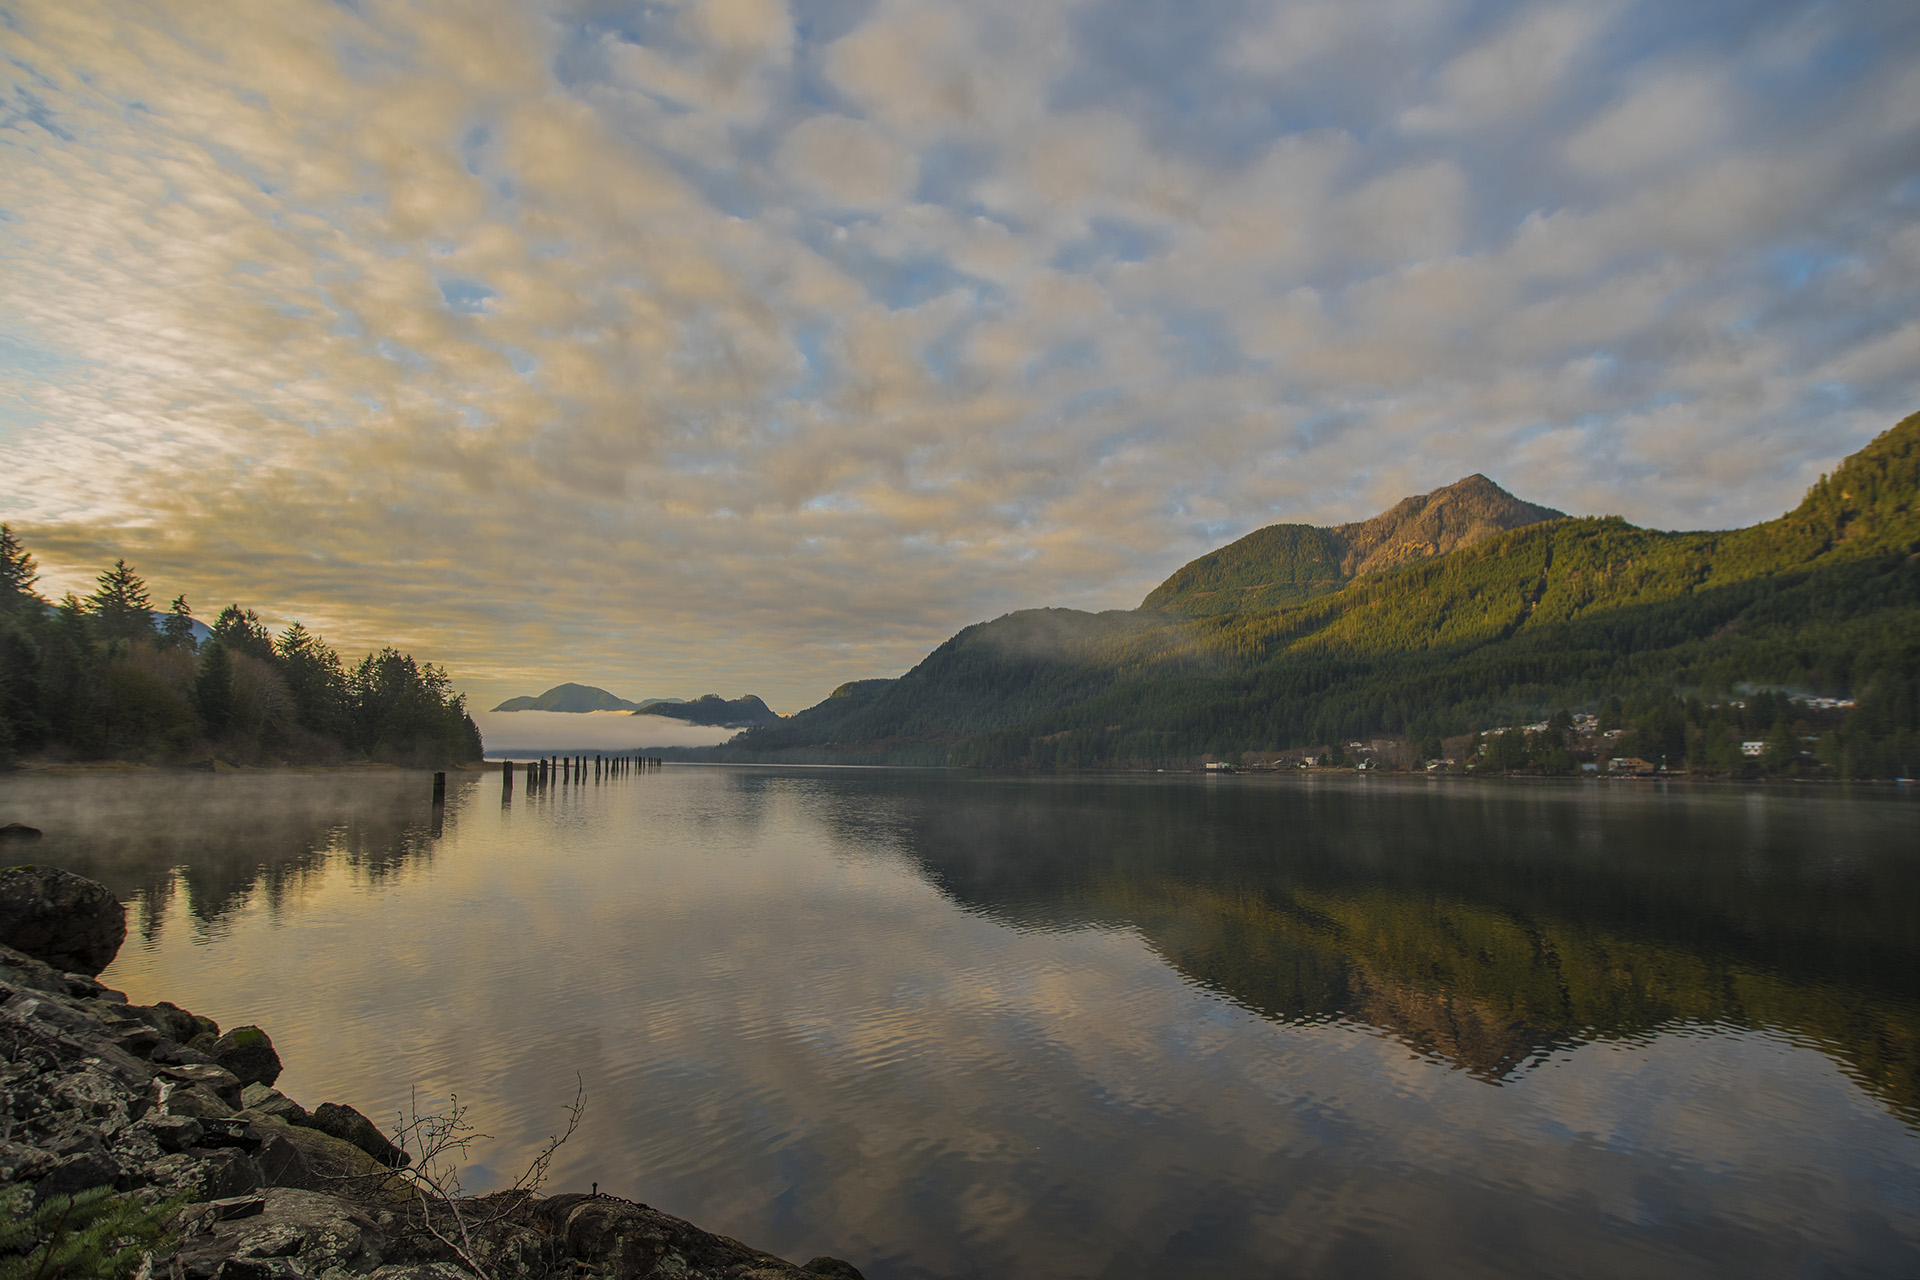 A stunning sunrise above the calm water of Tahsis inlet and Nootka Sound. The water is calm, reflecting the large mountain landscape that surrounds the village on the west coast of Vancouver Island.